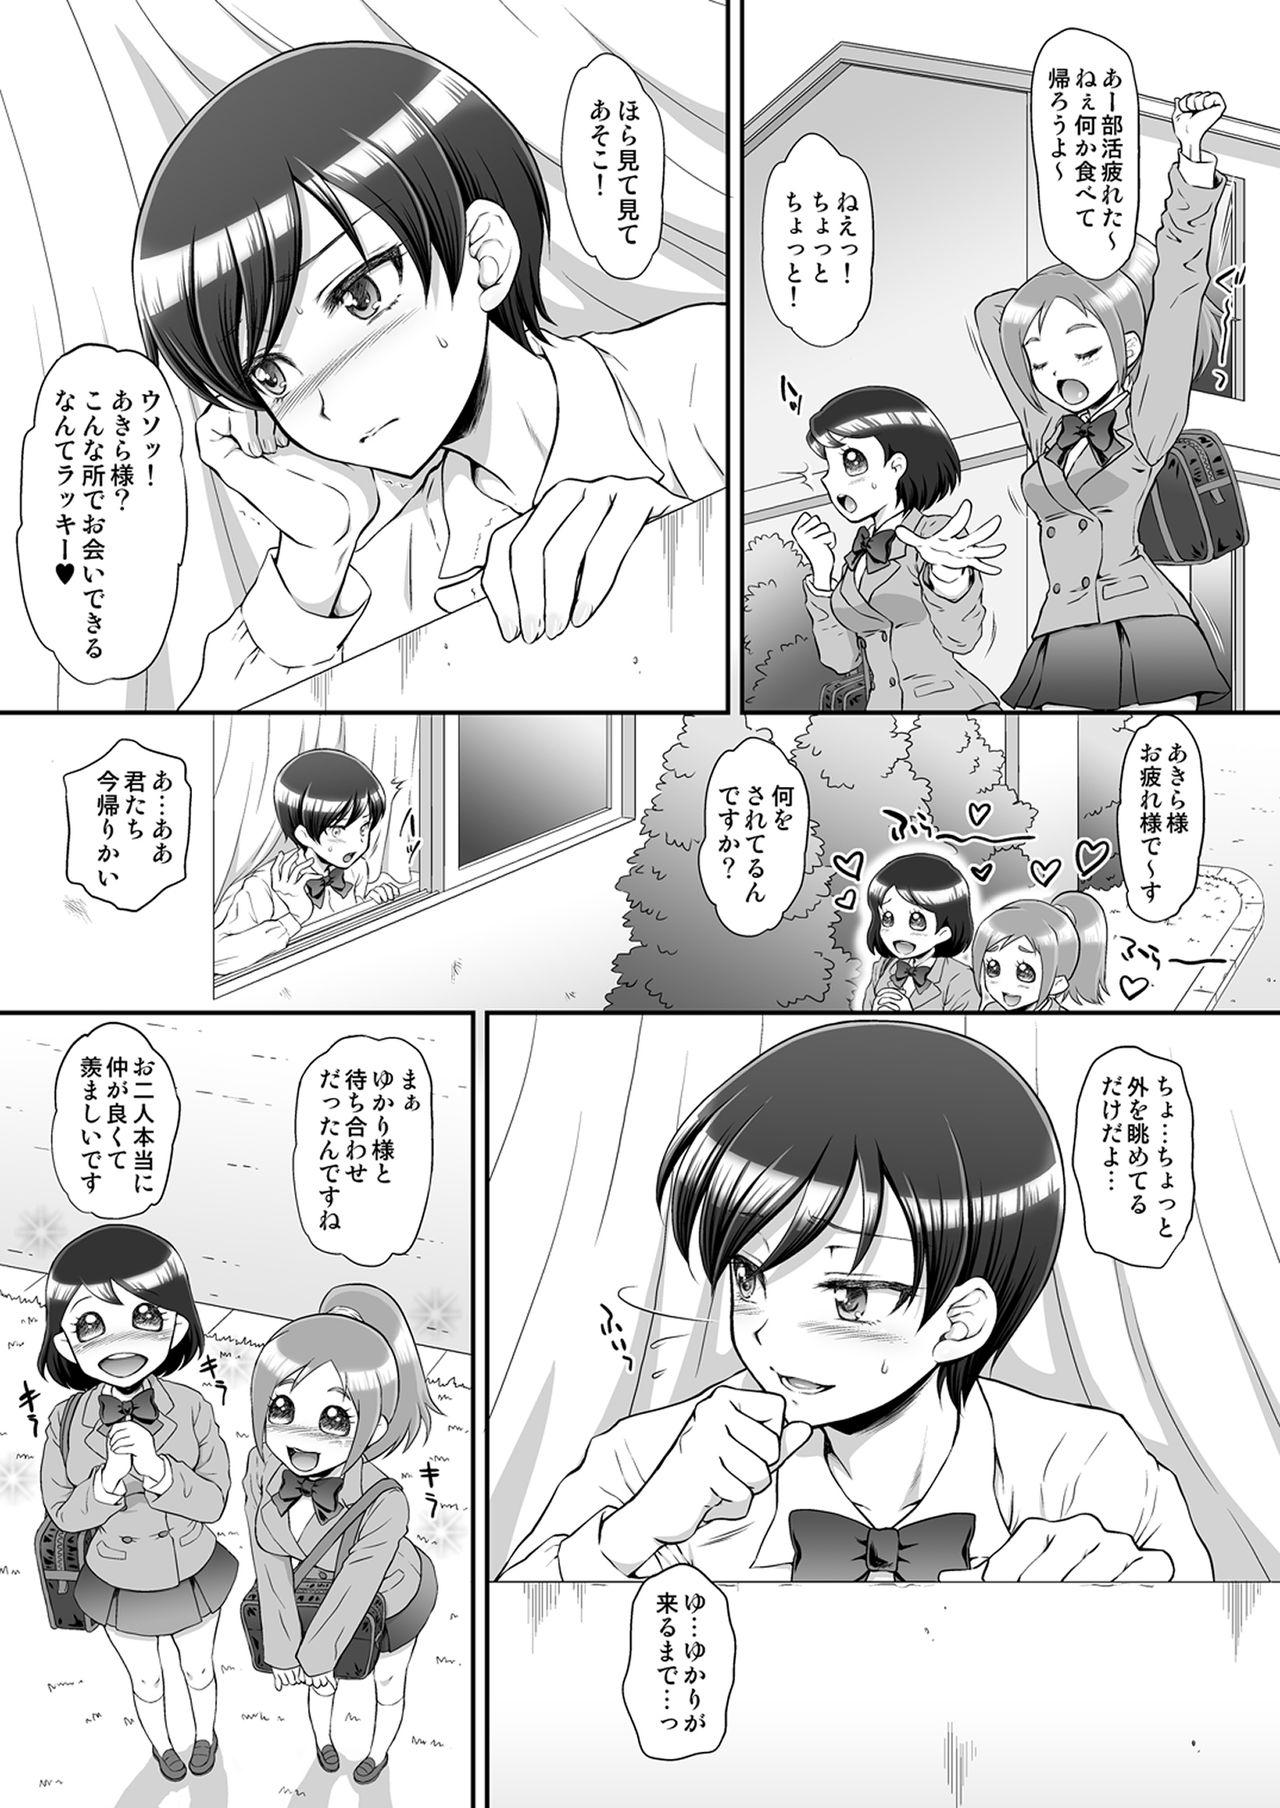 Amature Sex Omakebon Collection 2 - Pretty cure Girl Girl - Page 3